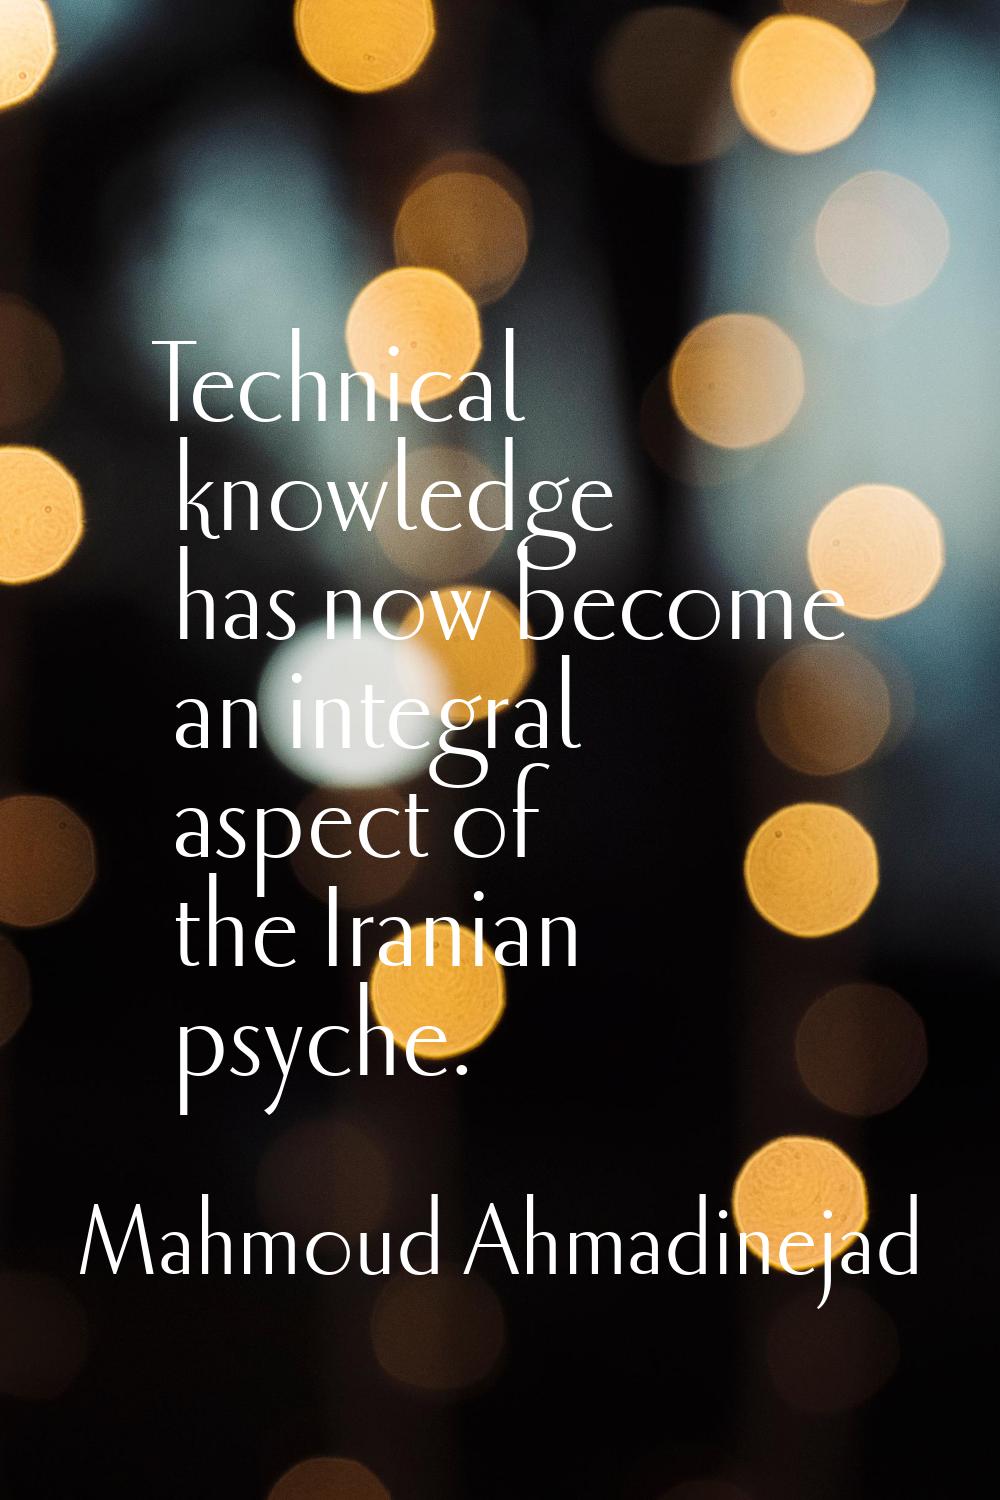 Technical knowledge has now become an integral aspect of the Iranian psyche.